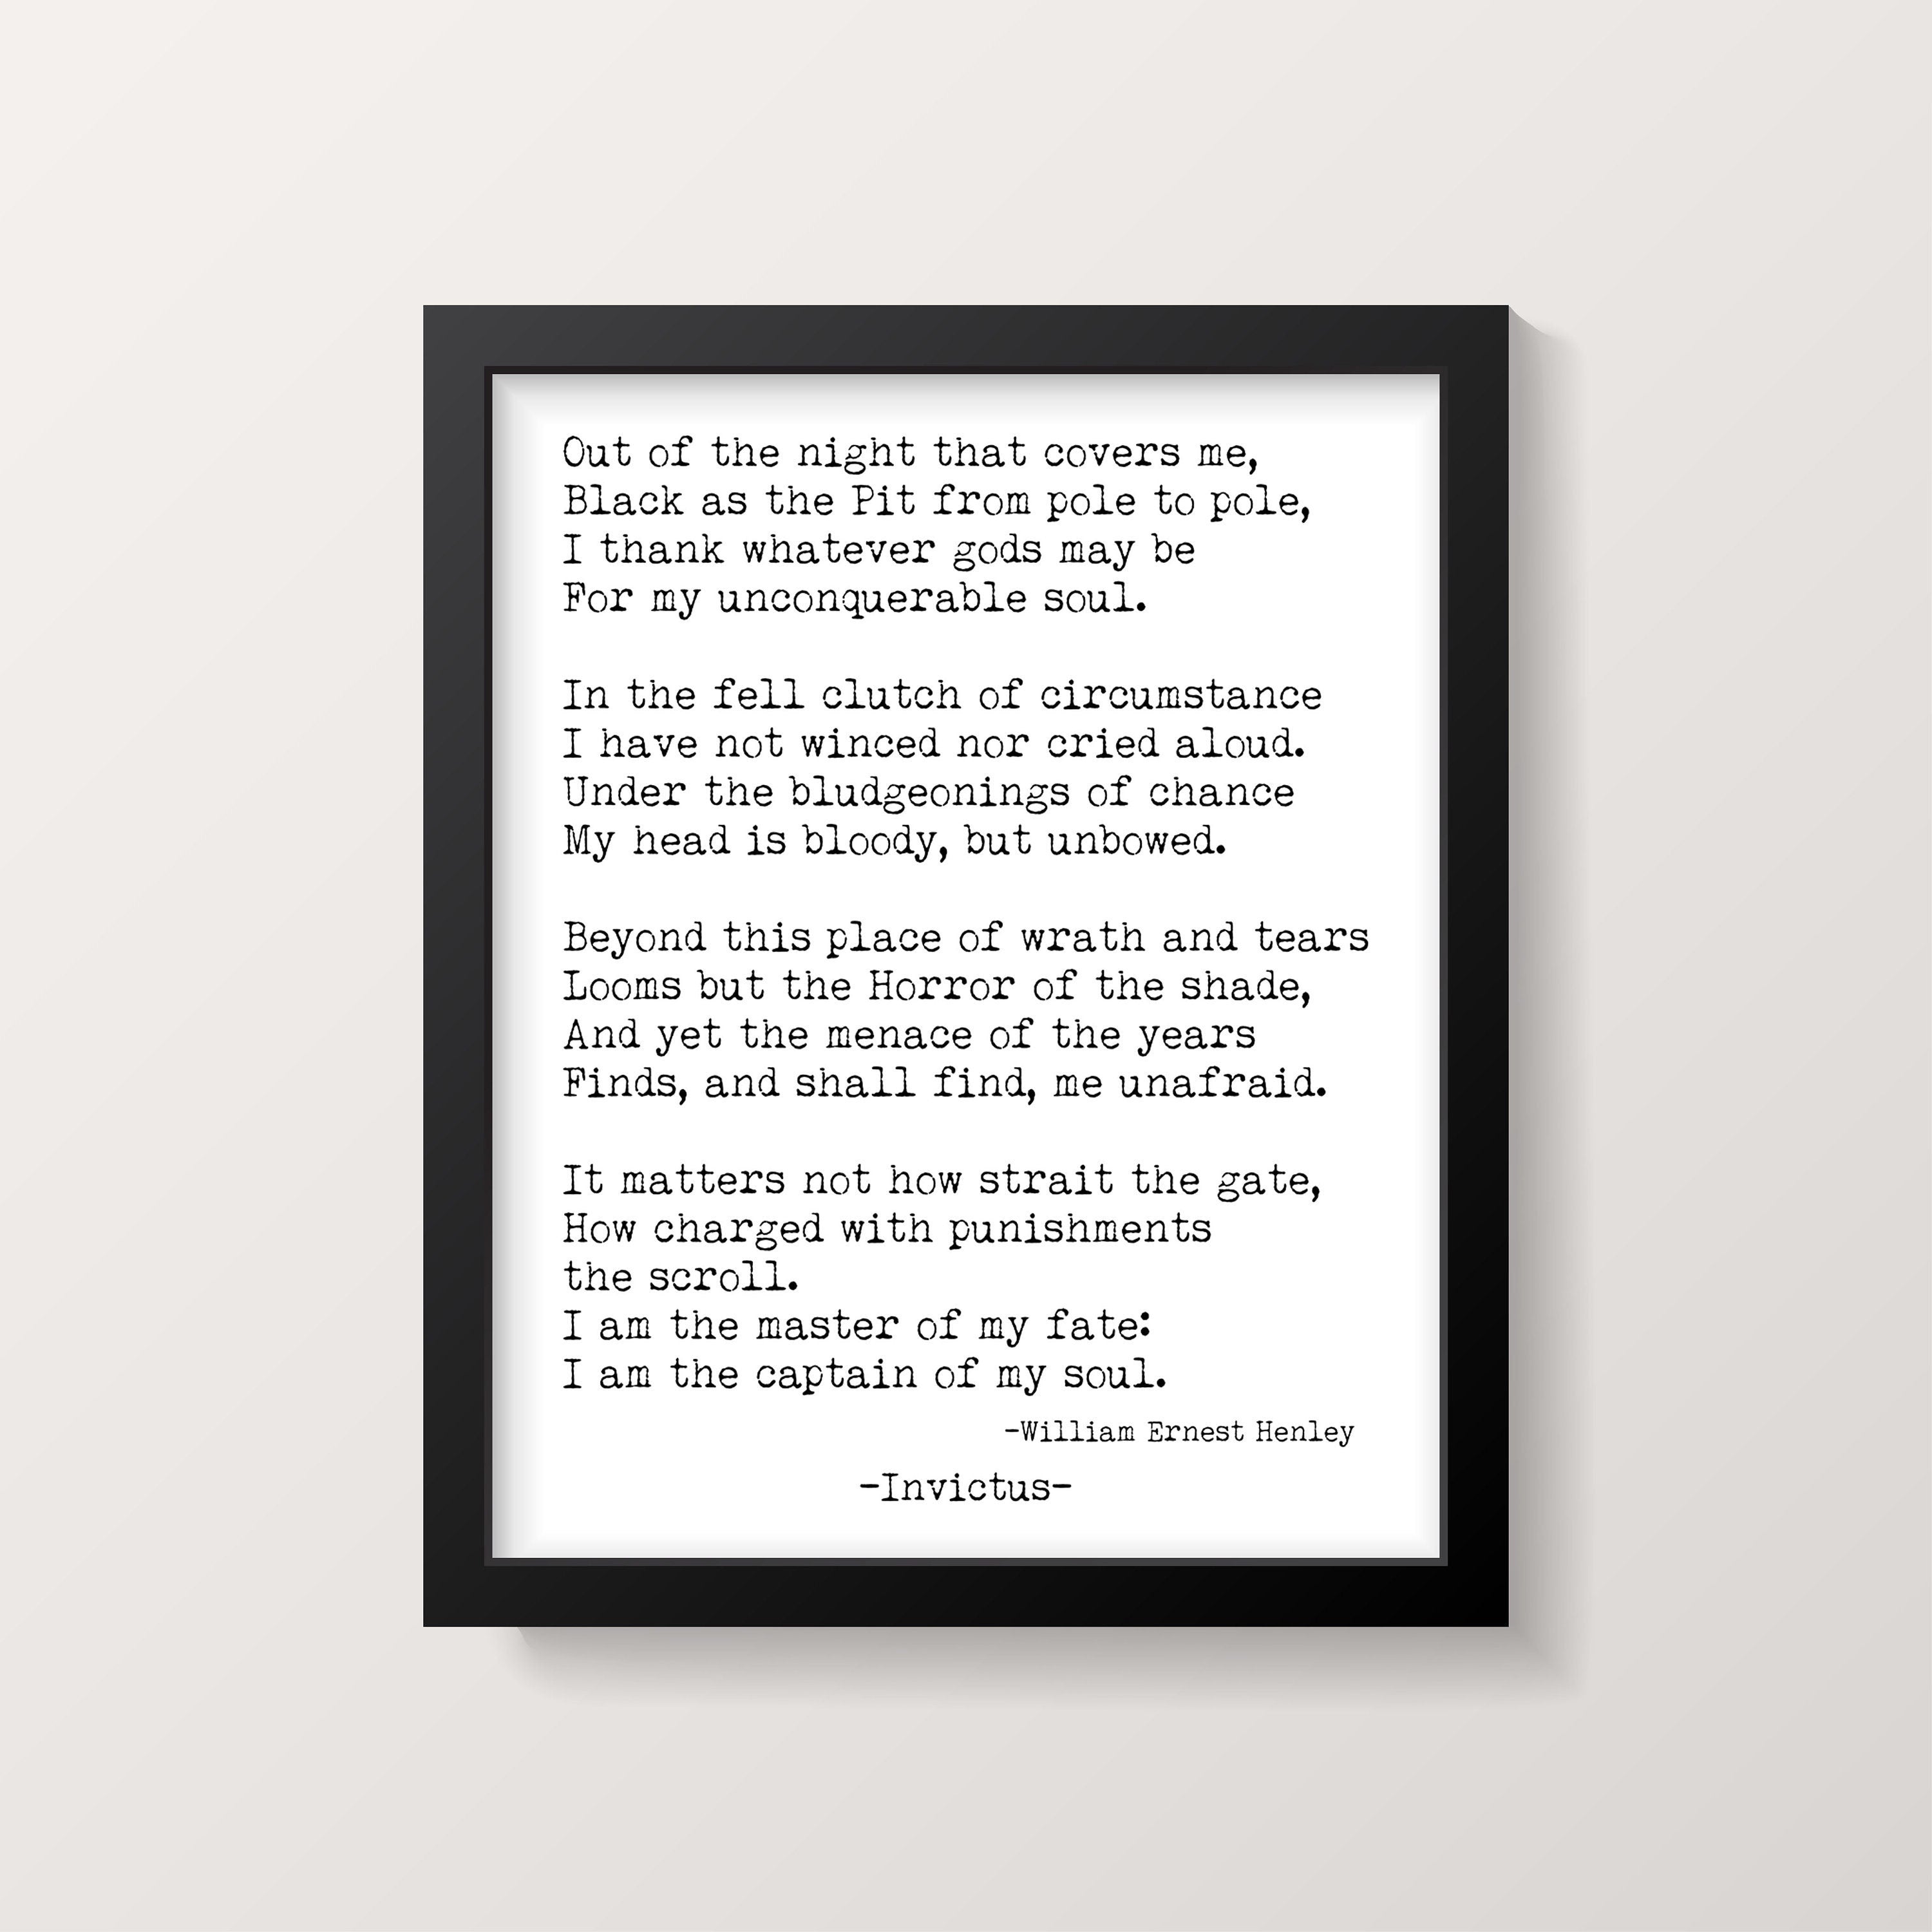 Invictus William Ernest Henley Print, I am the Master of my Fate , I am the captain of my soul Inspirational Art Print